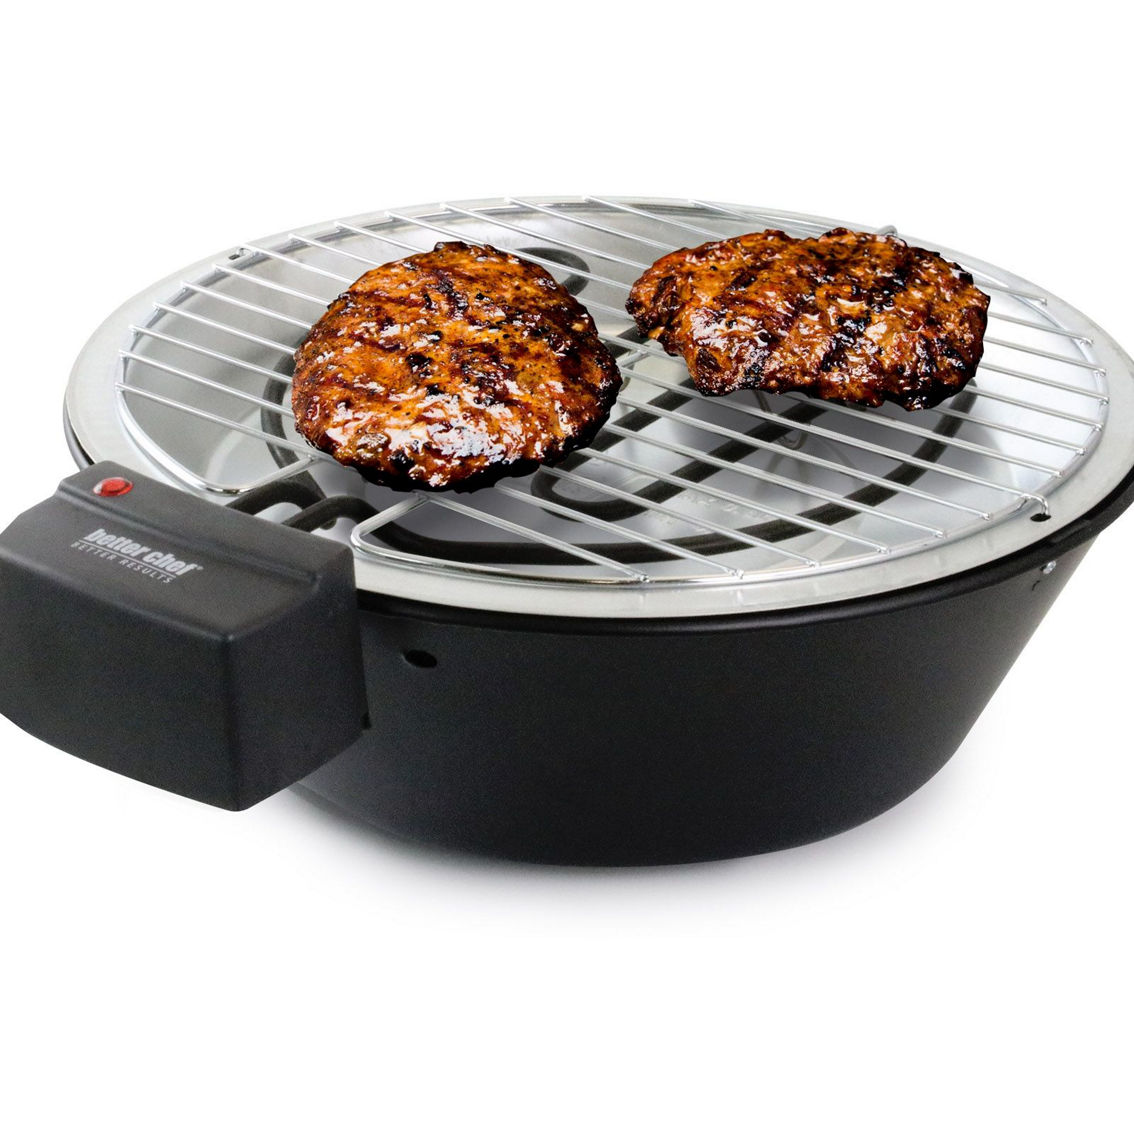 Better Chef Indoor Outdoor 14 in Tabletop Electric Barbecue Grill - Image 3 of 5